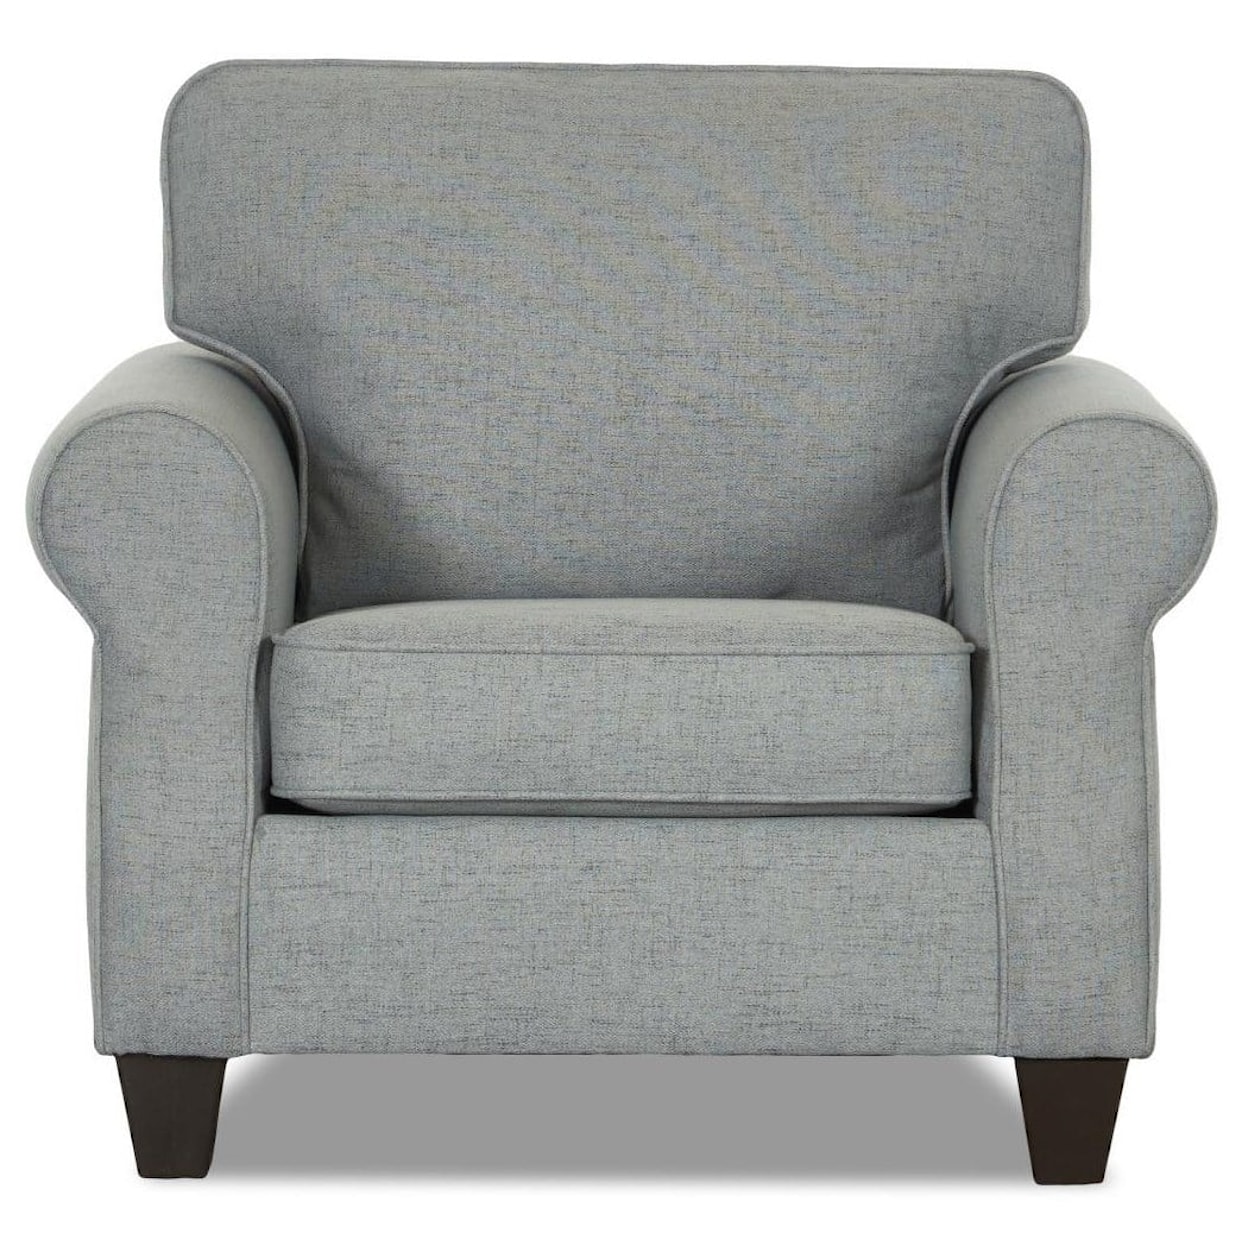 Wood House Britney Britney Upholstered Chair